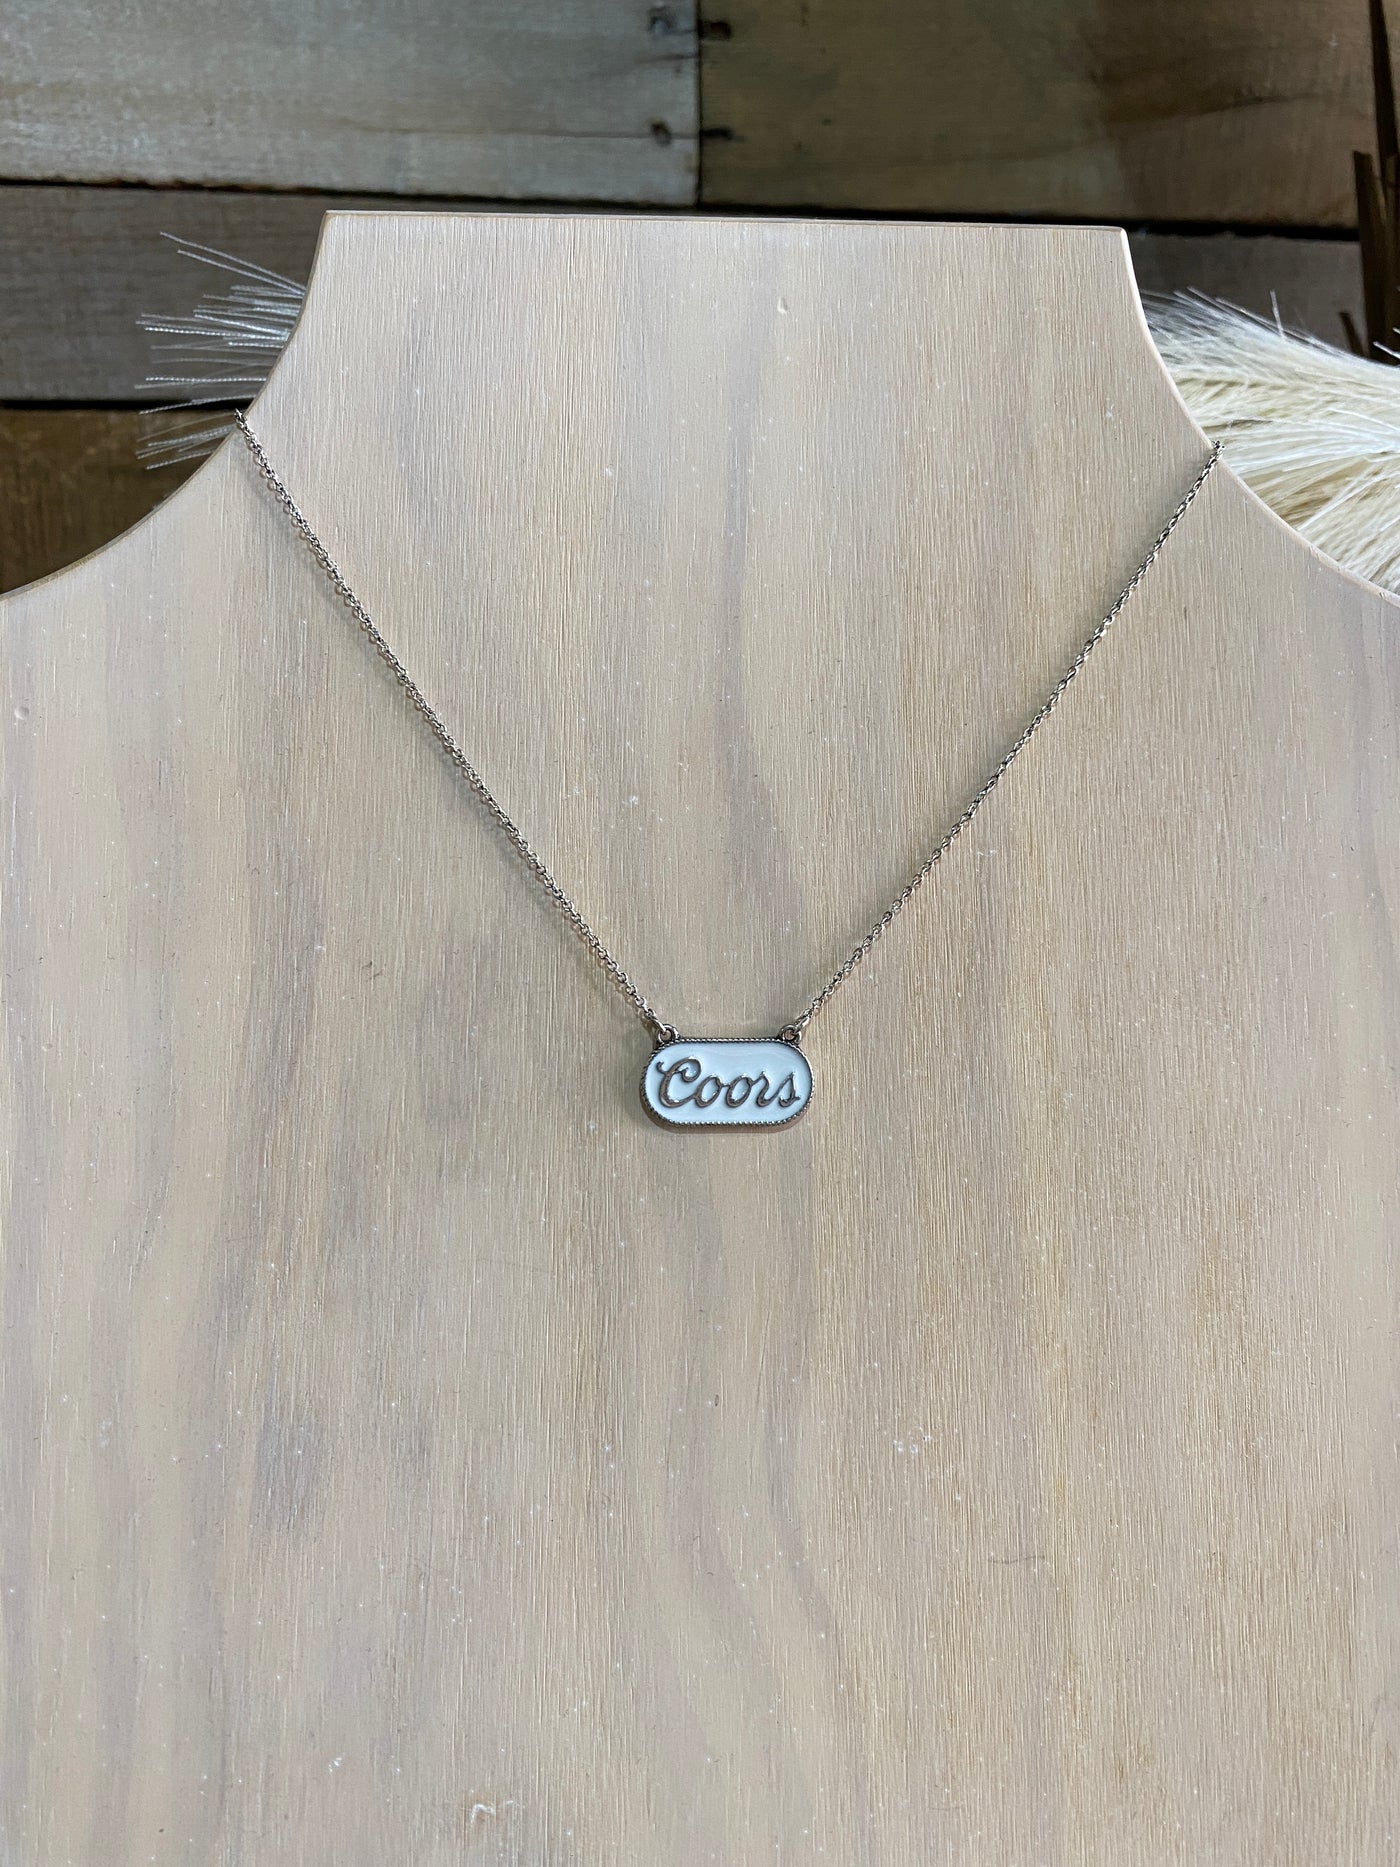 Rocky Mountain Coors Necklace